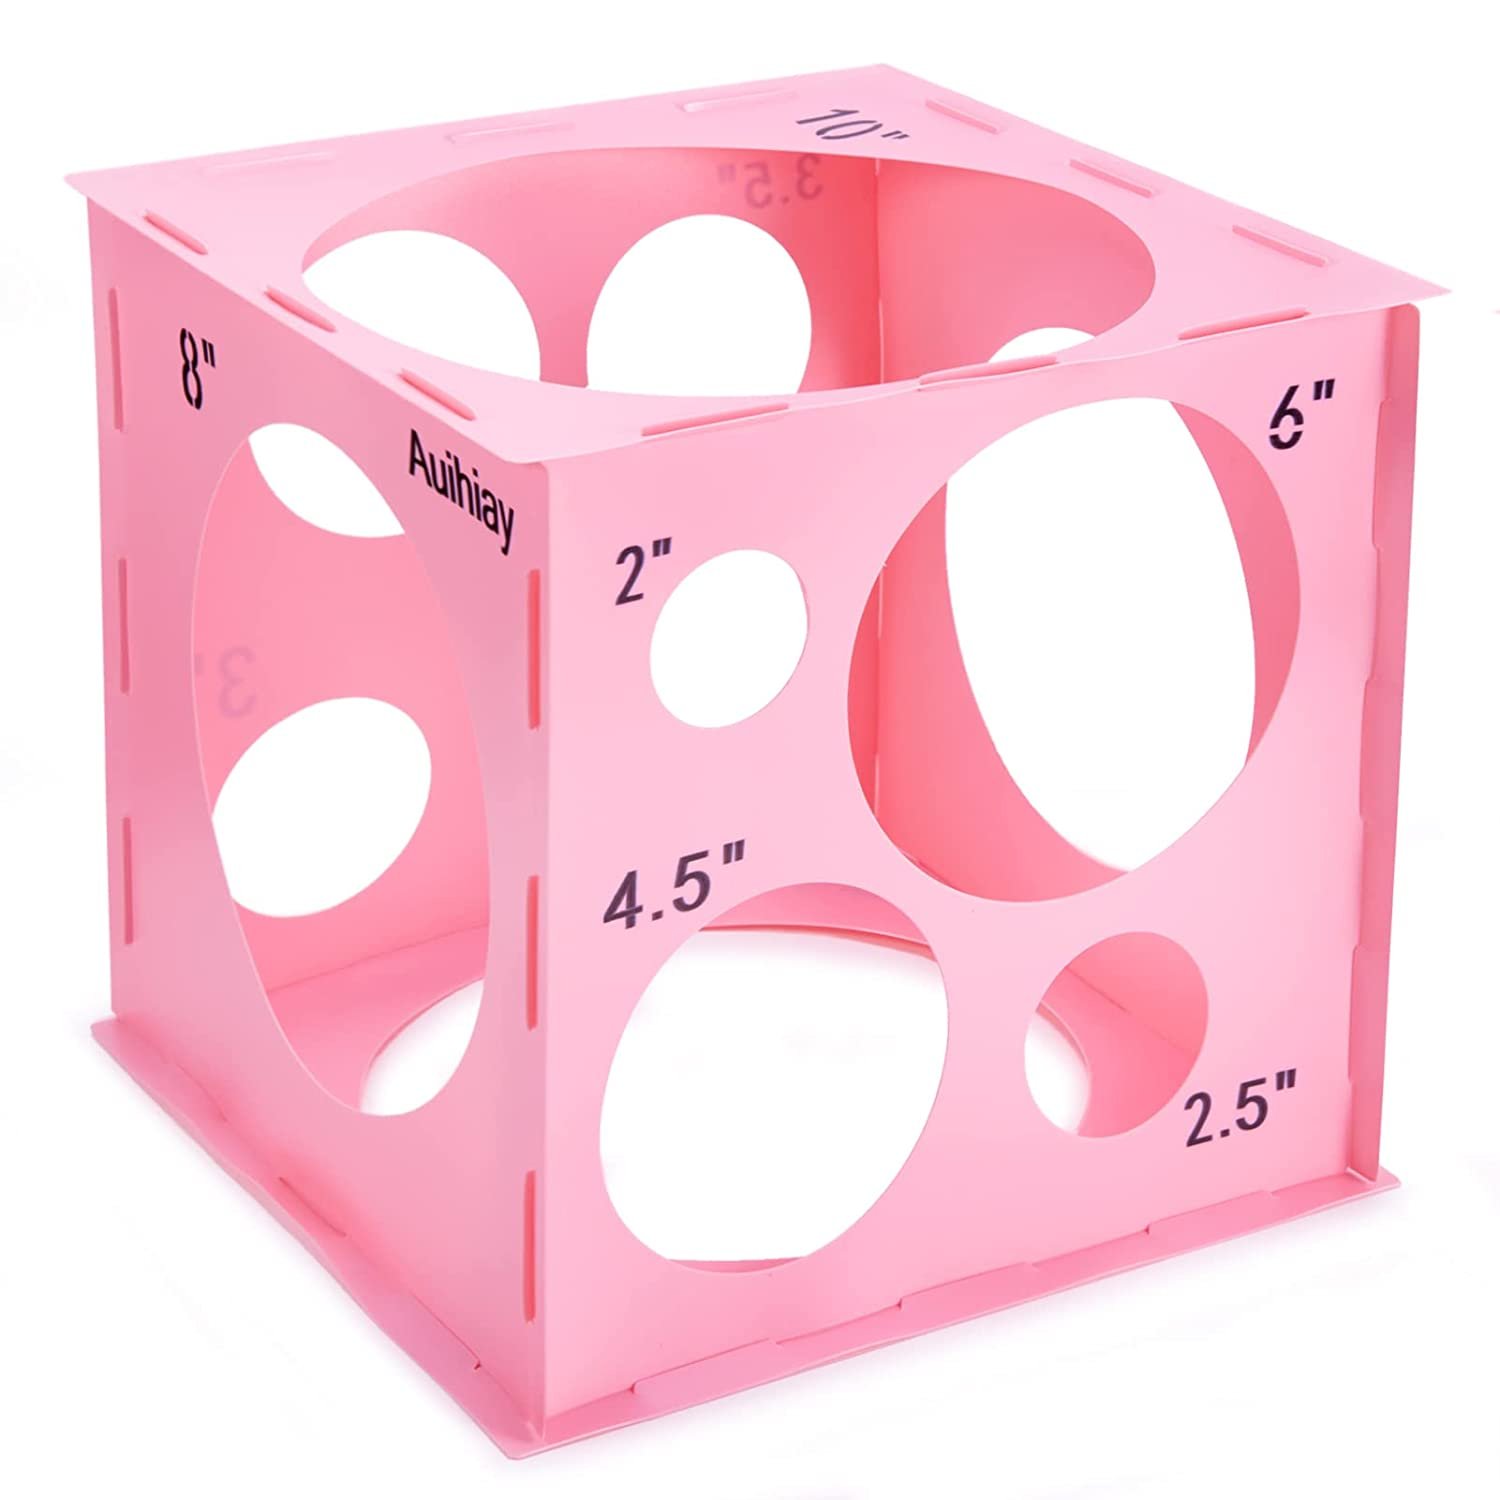 12 Holes Plastic Balloon Sizer Box Cube, Pink Collapsible Balloon Size Measurement Tool F